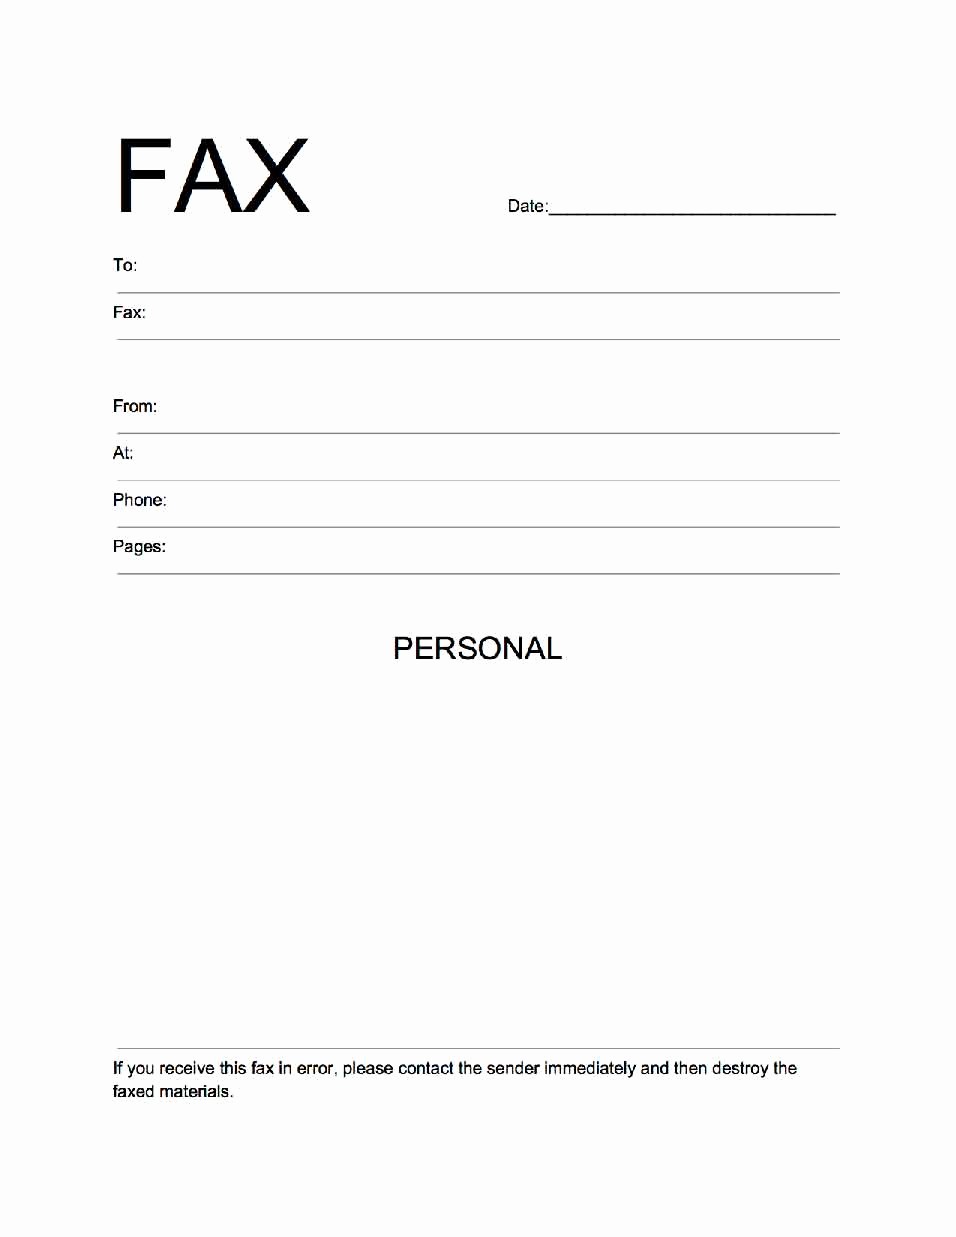 Sample Of Fax Cover Page Luxury Free Fax Cover Sheet Template Download